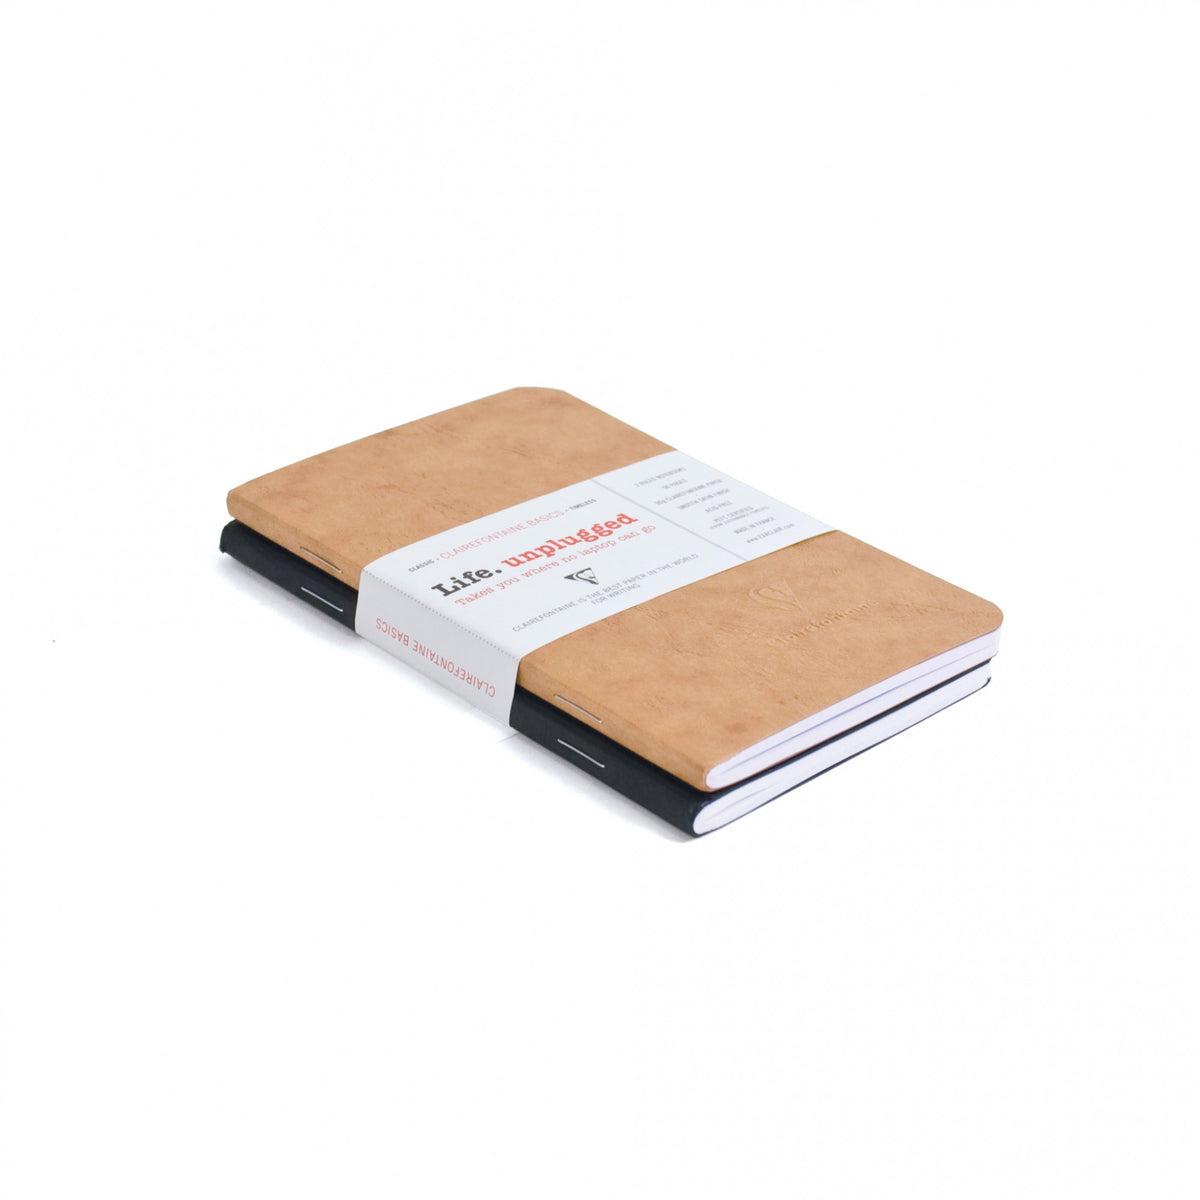 Clairefontaine Basics Life Unplugged Duo Notebooks (2-Pack)